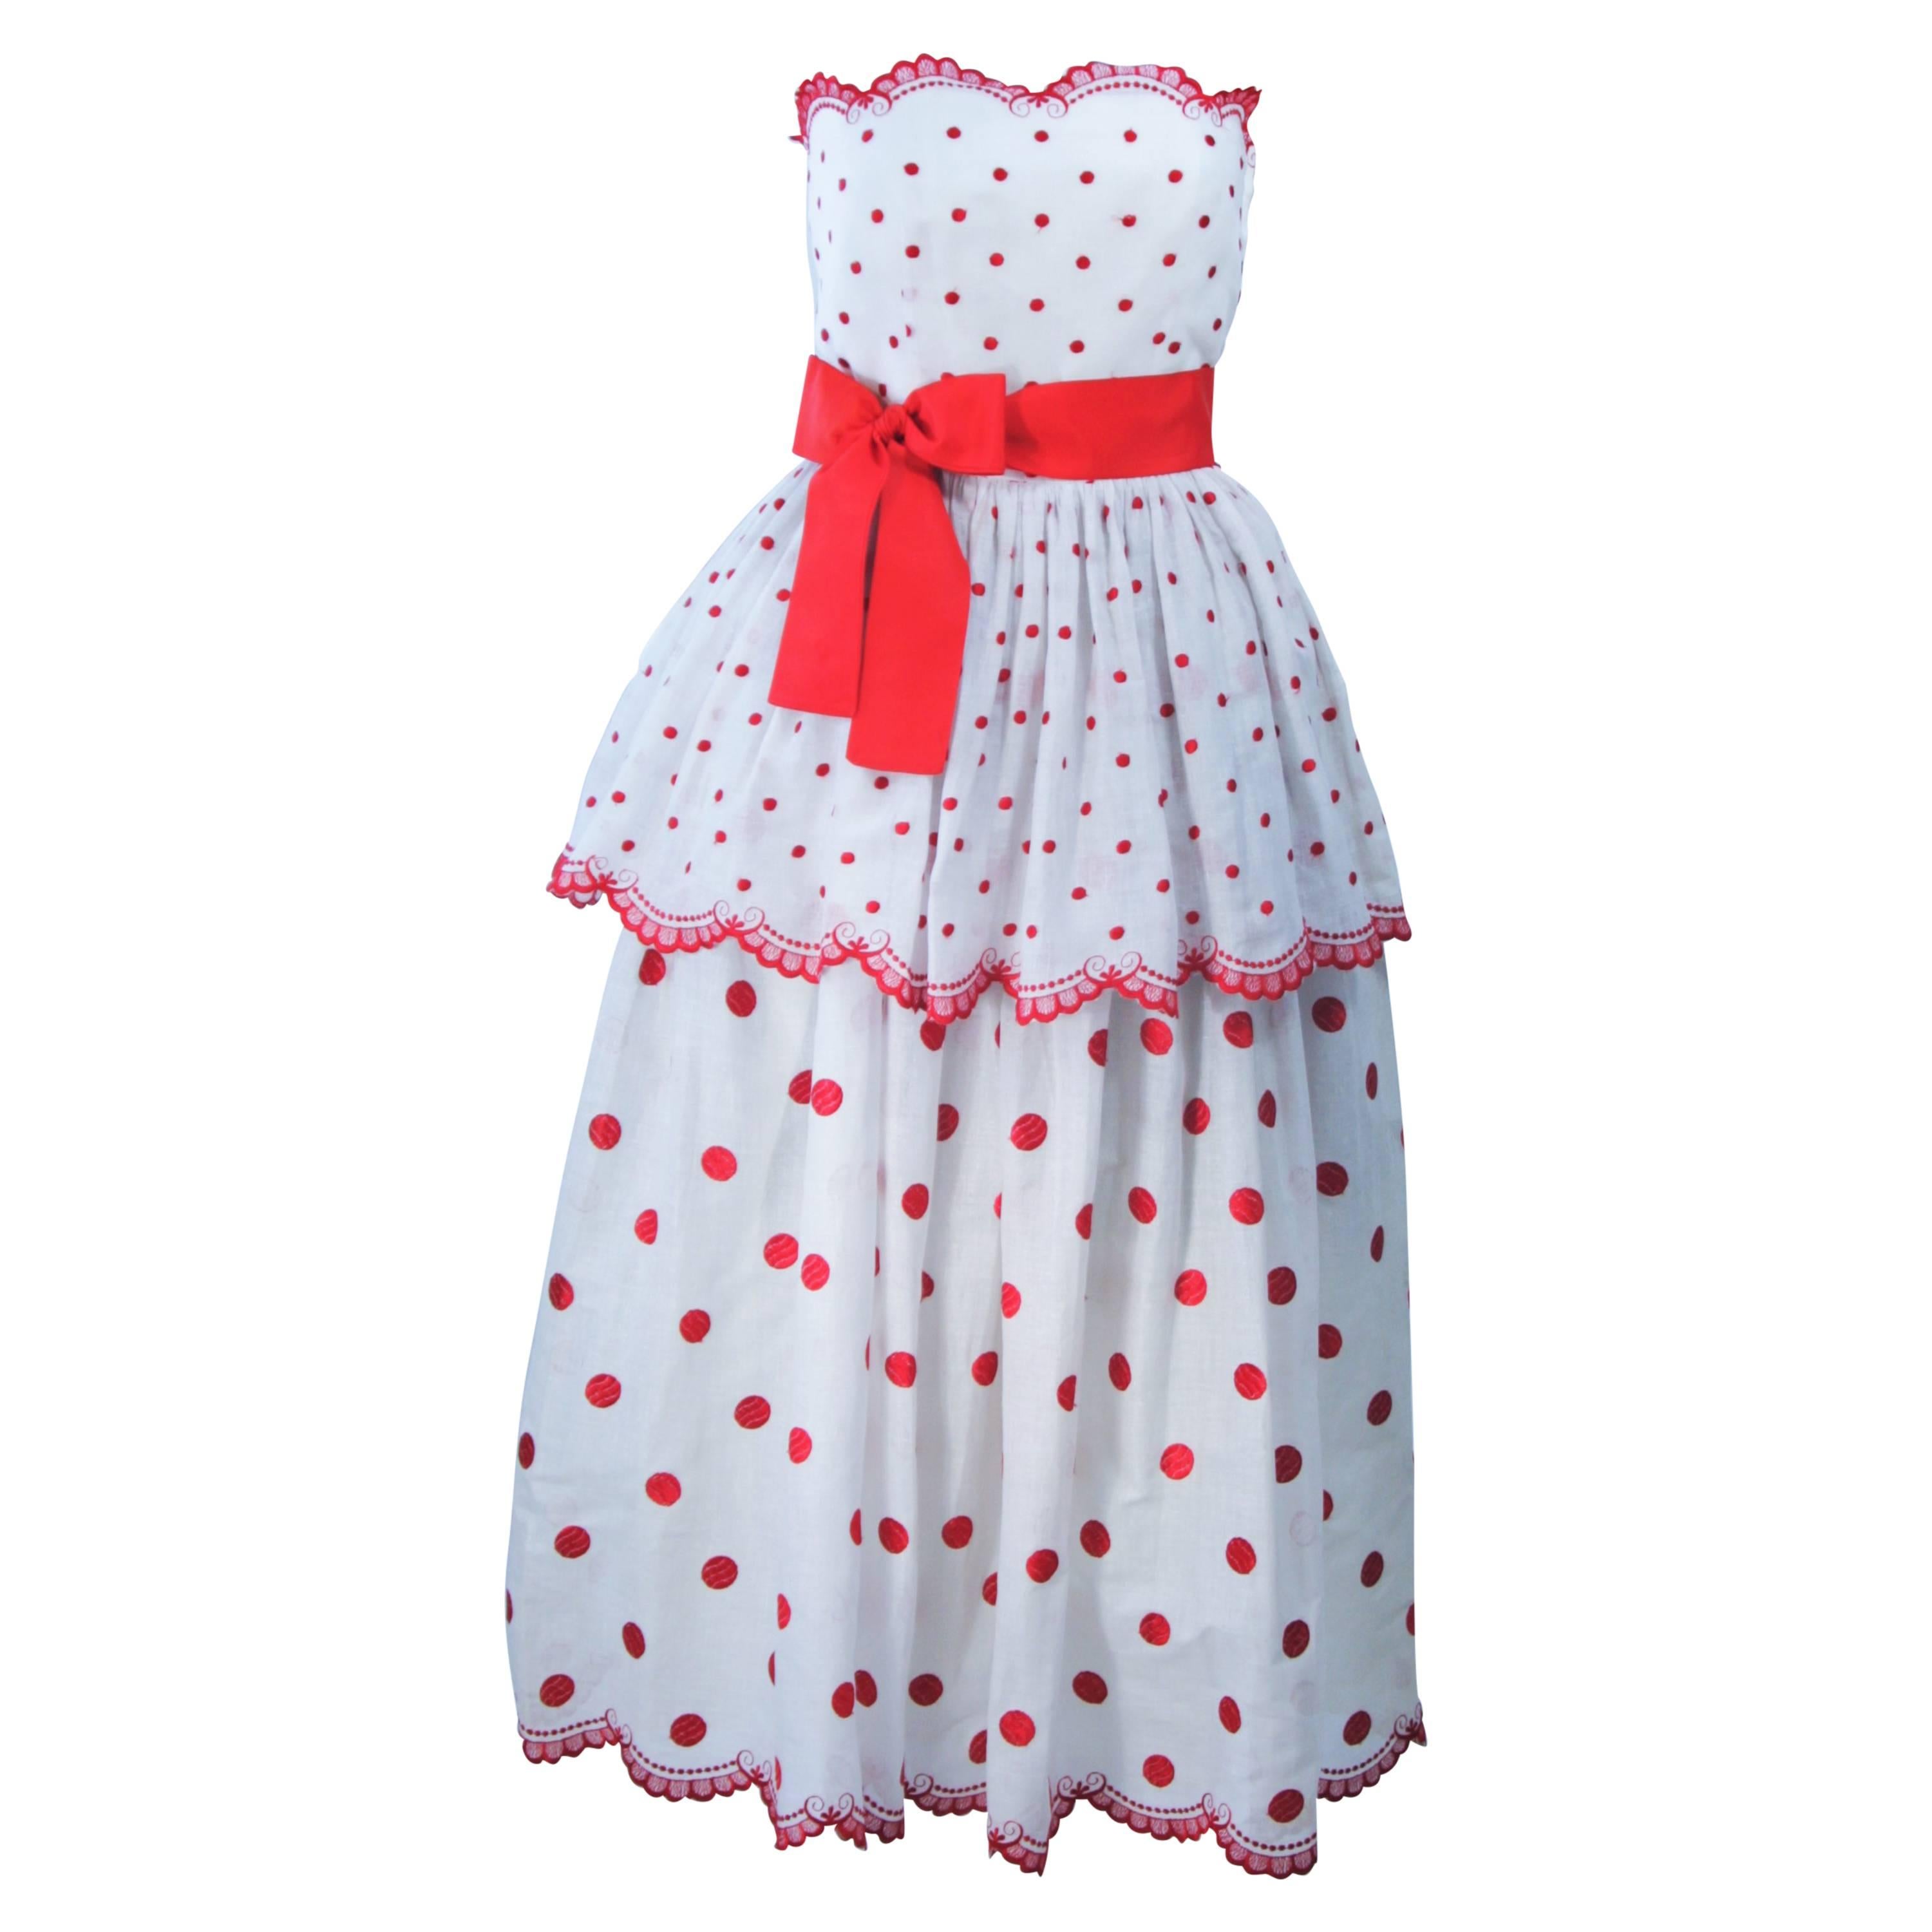 ALBERTO CAPRARO Tiered White & Red Embroidered Cocktail Dress with Ribbon Size 6